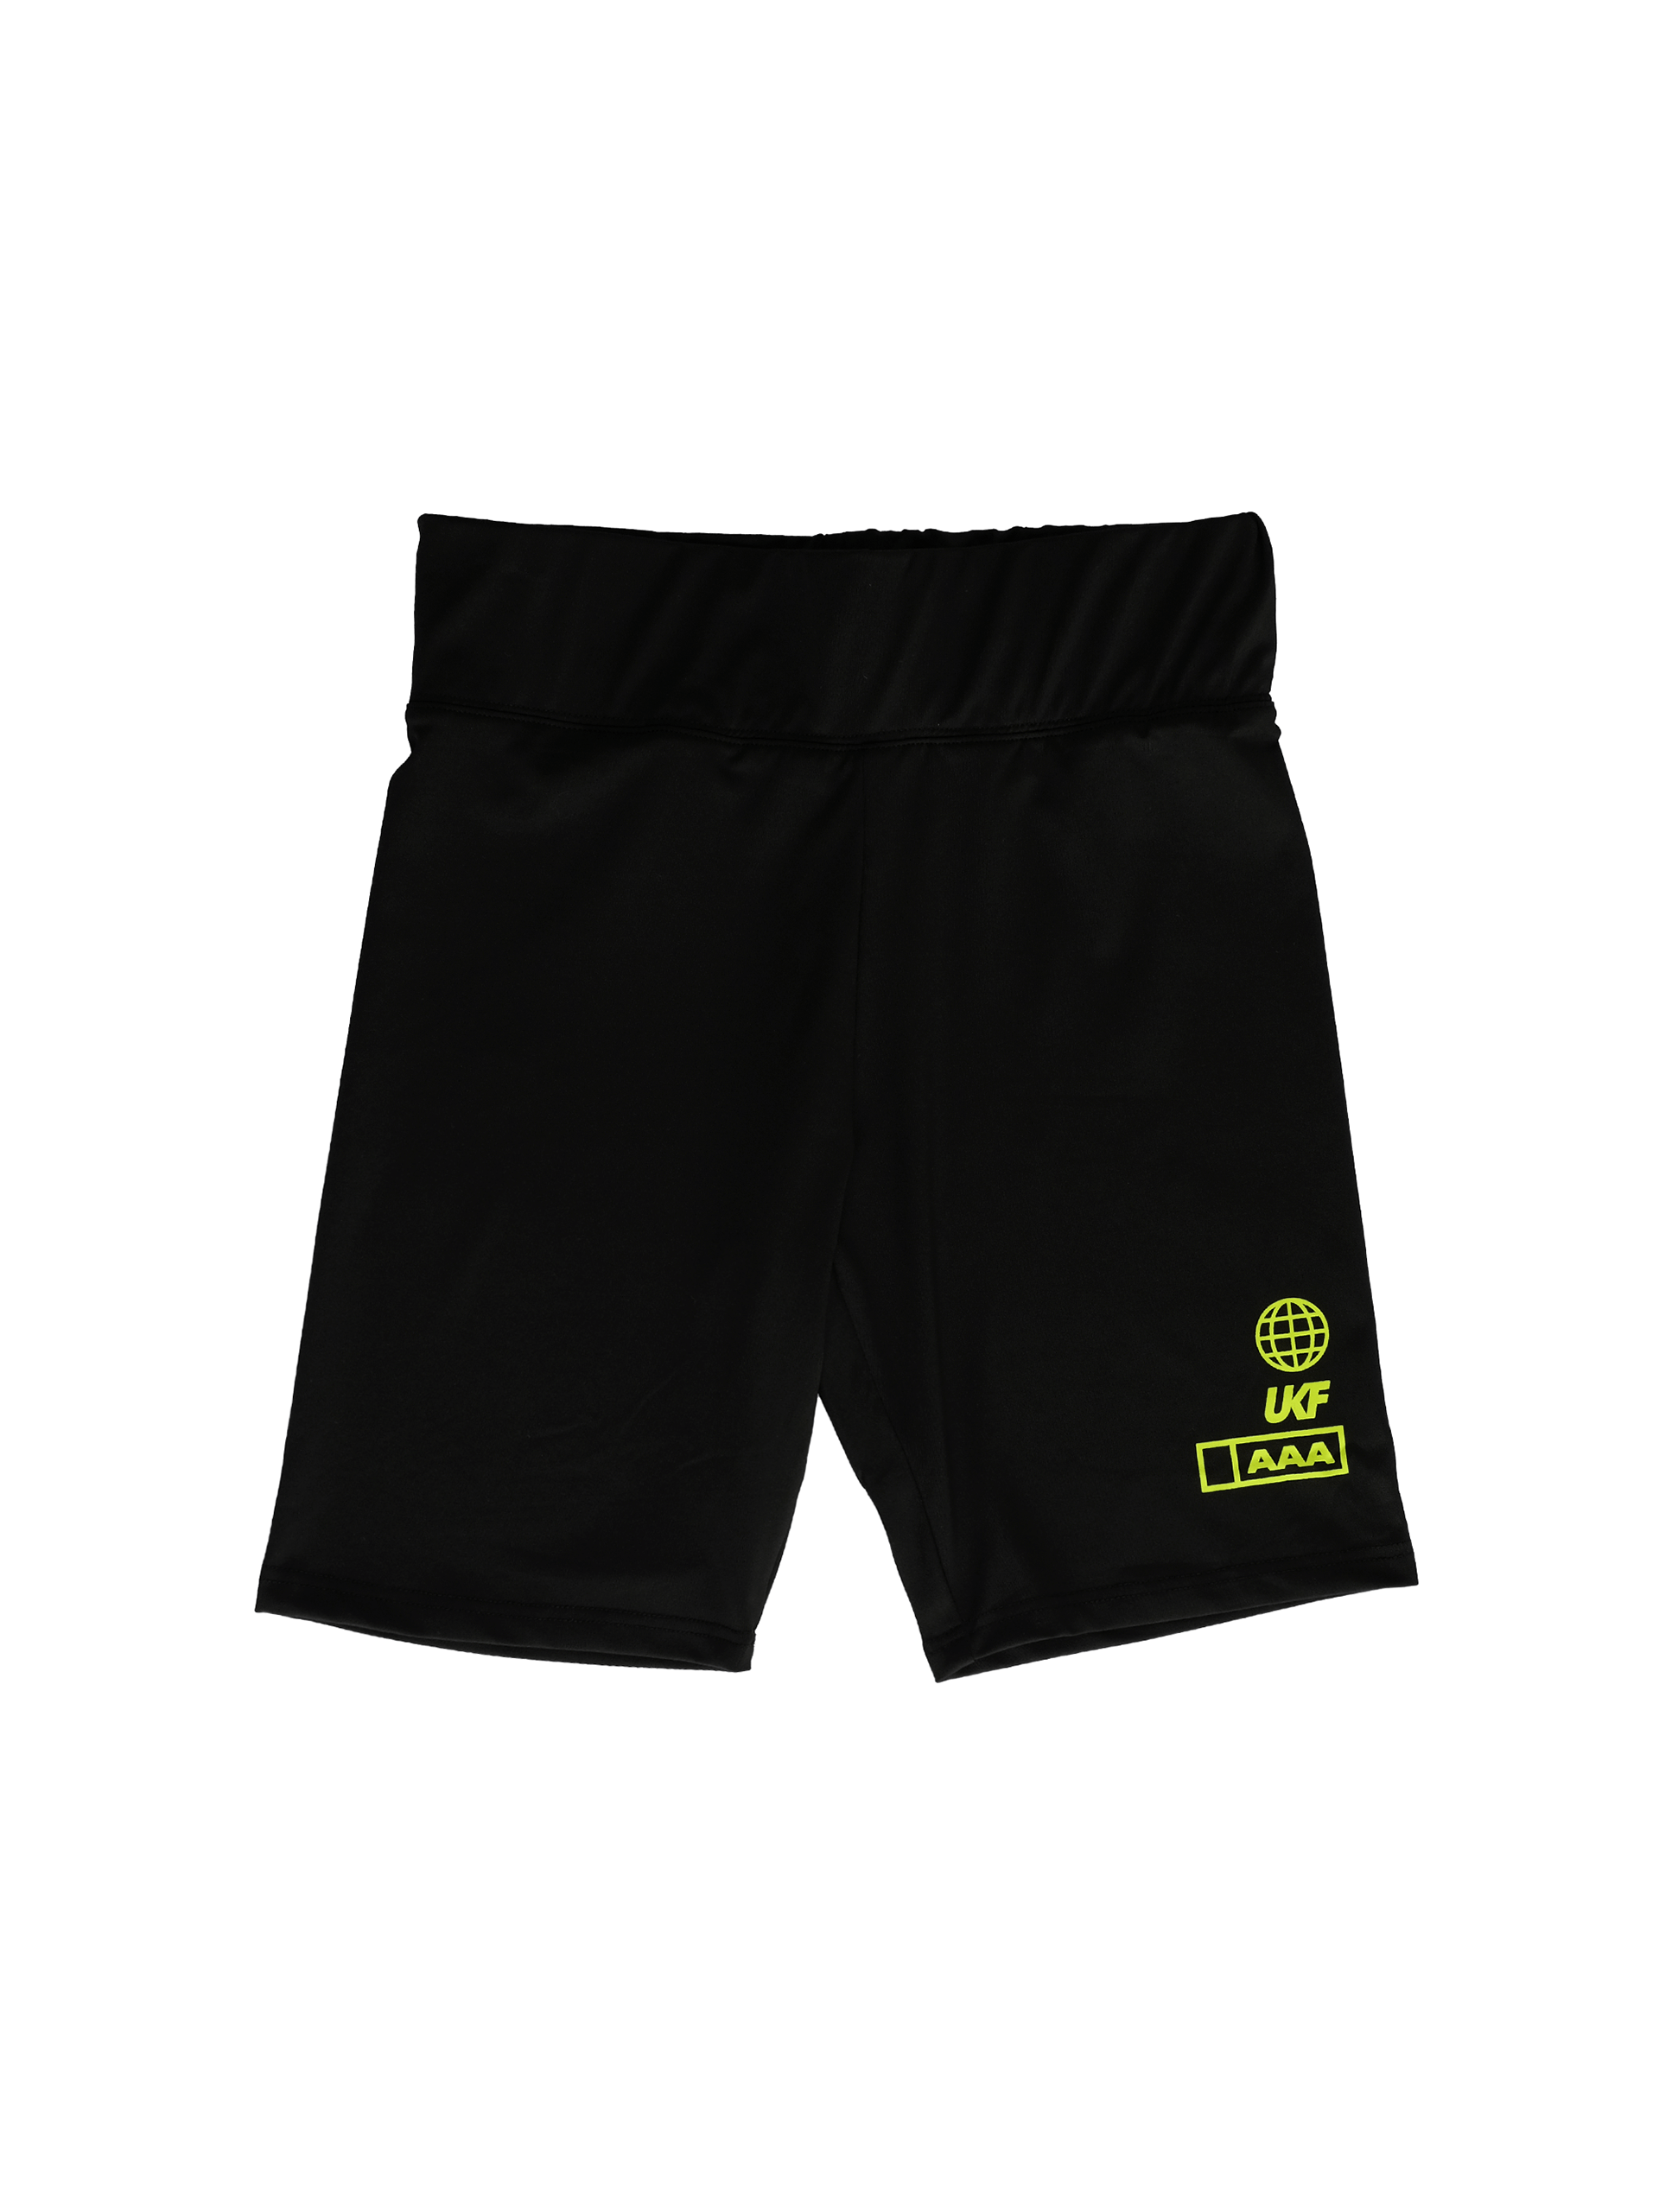 Rave Collective - Bicycle Shorts - made from lycra with green screenprint of outlined globe, UKF and AAA pass detailing on the leg.